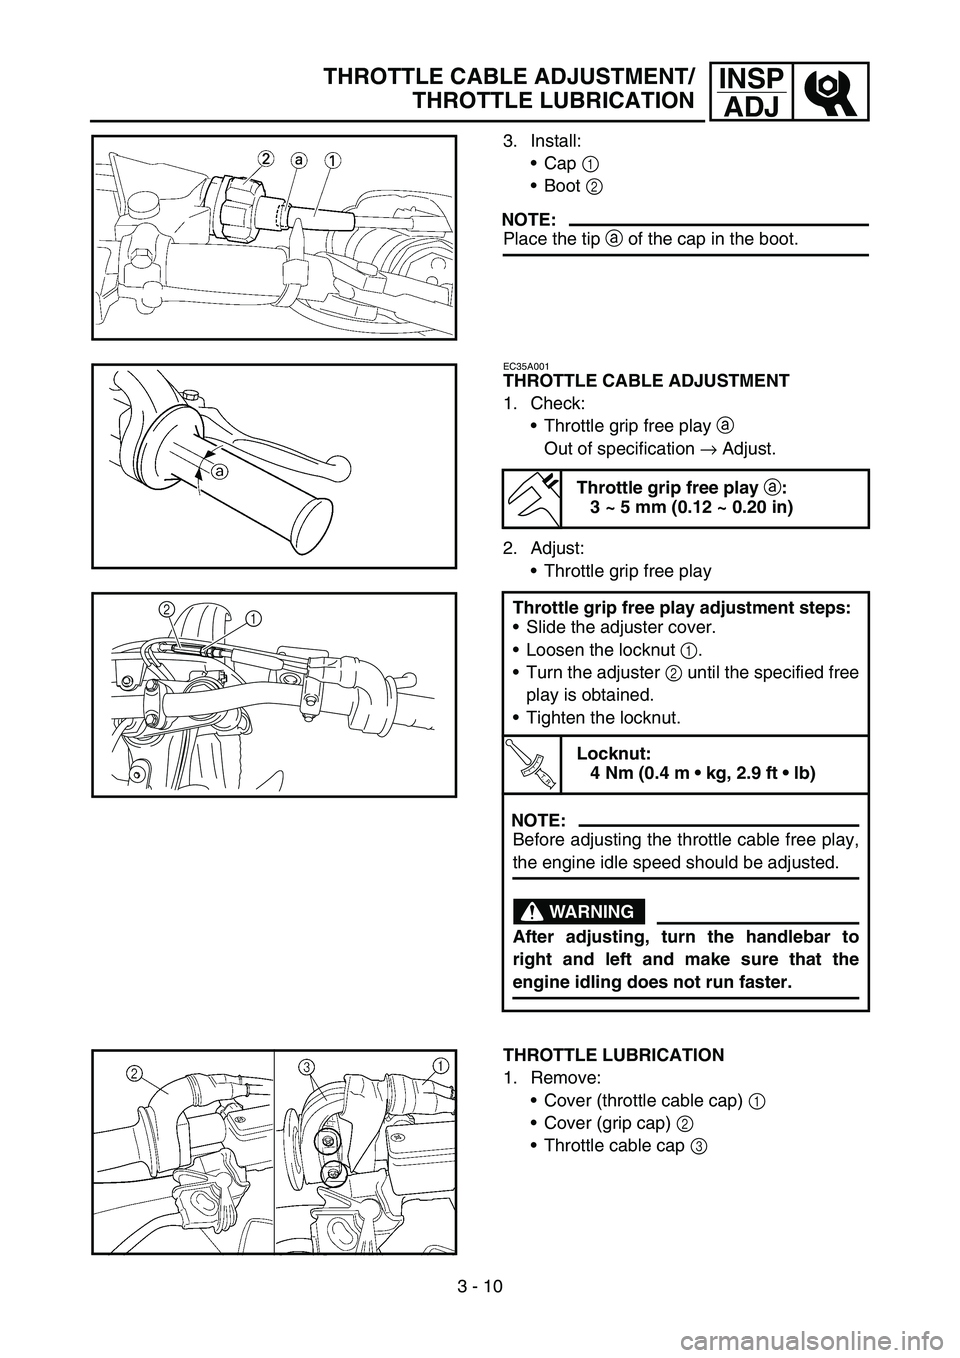 YAMAHA YZ450F 2007  Owners Manual 3 - 10
INSP
ADJTHROTTLE CABLE ADJUSTMENT/
THROTTLE LUBRICATION
3. Install:
Cap 1 
Boot 2 
NOTE:
Place the tip a of the cap in the boot.
EC35A001
THROTTLE CABLE ADJUSTMENT
1. Check:
Throttle grip fr